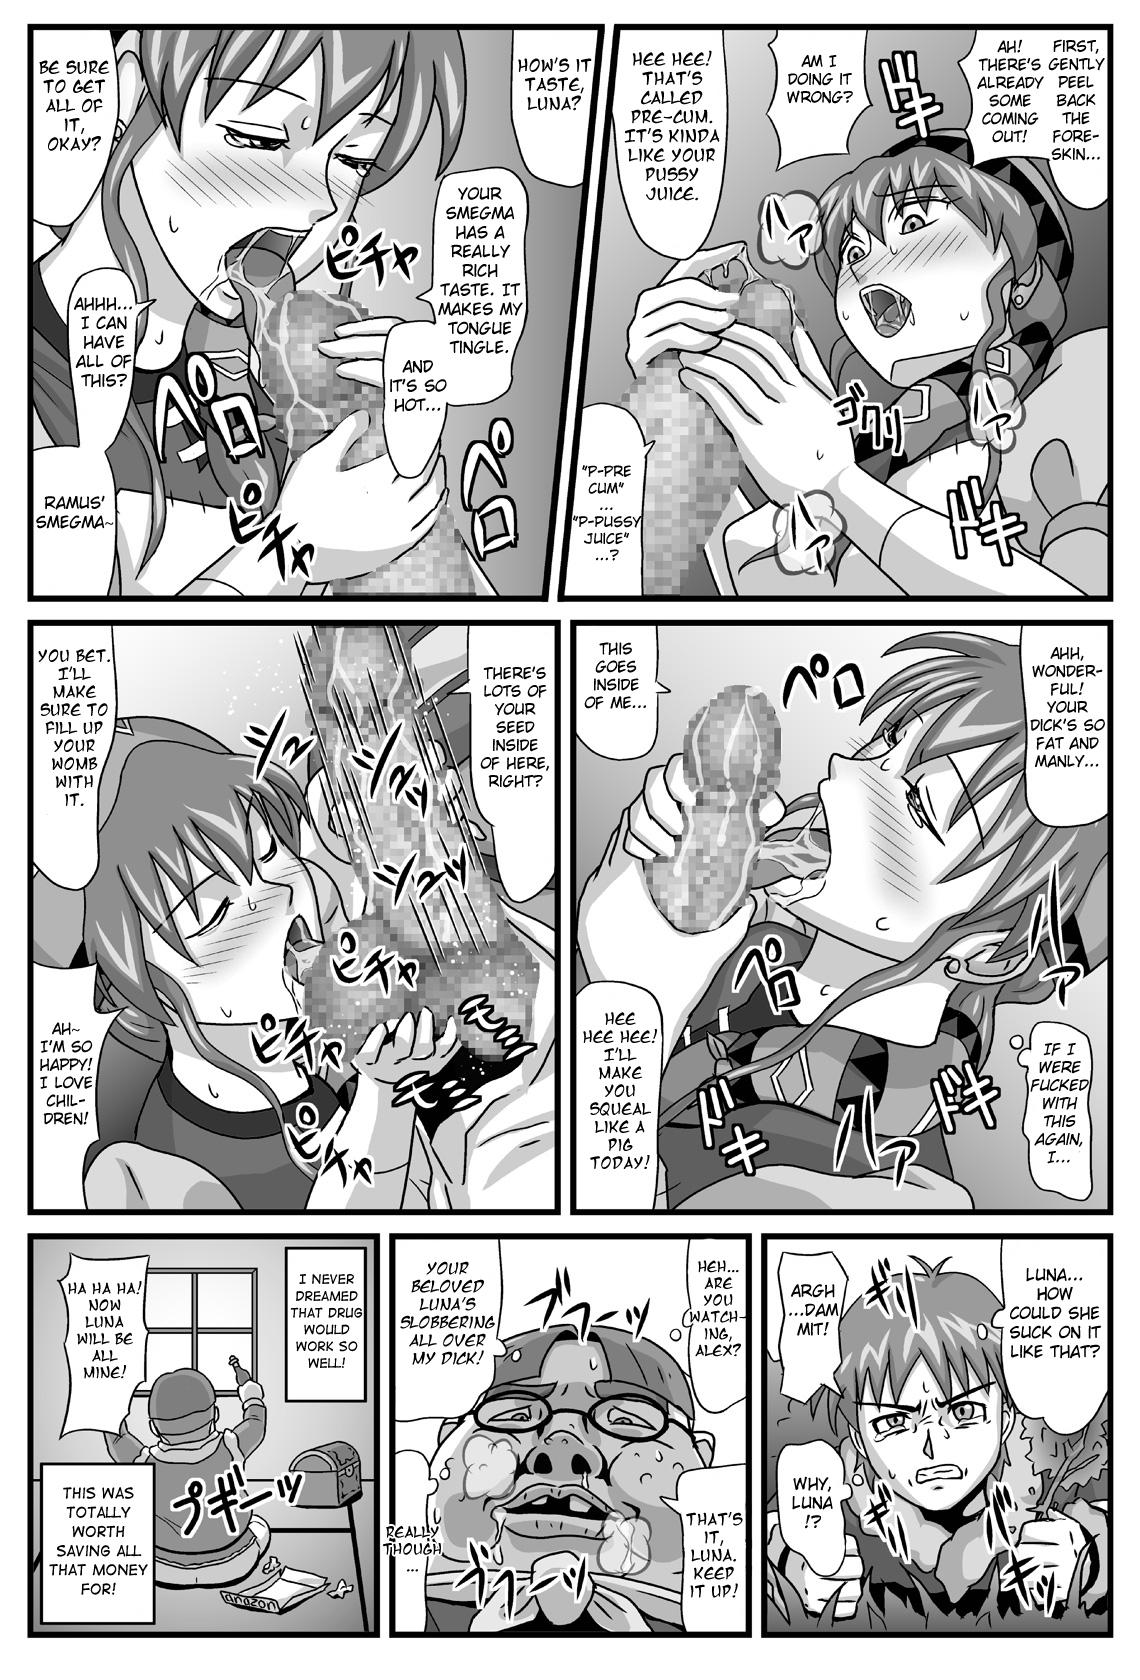 Suckingdick The Cumdumpster Princess of Burg 01 - Lunar silver star story Swallowing - Page 7